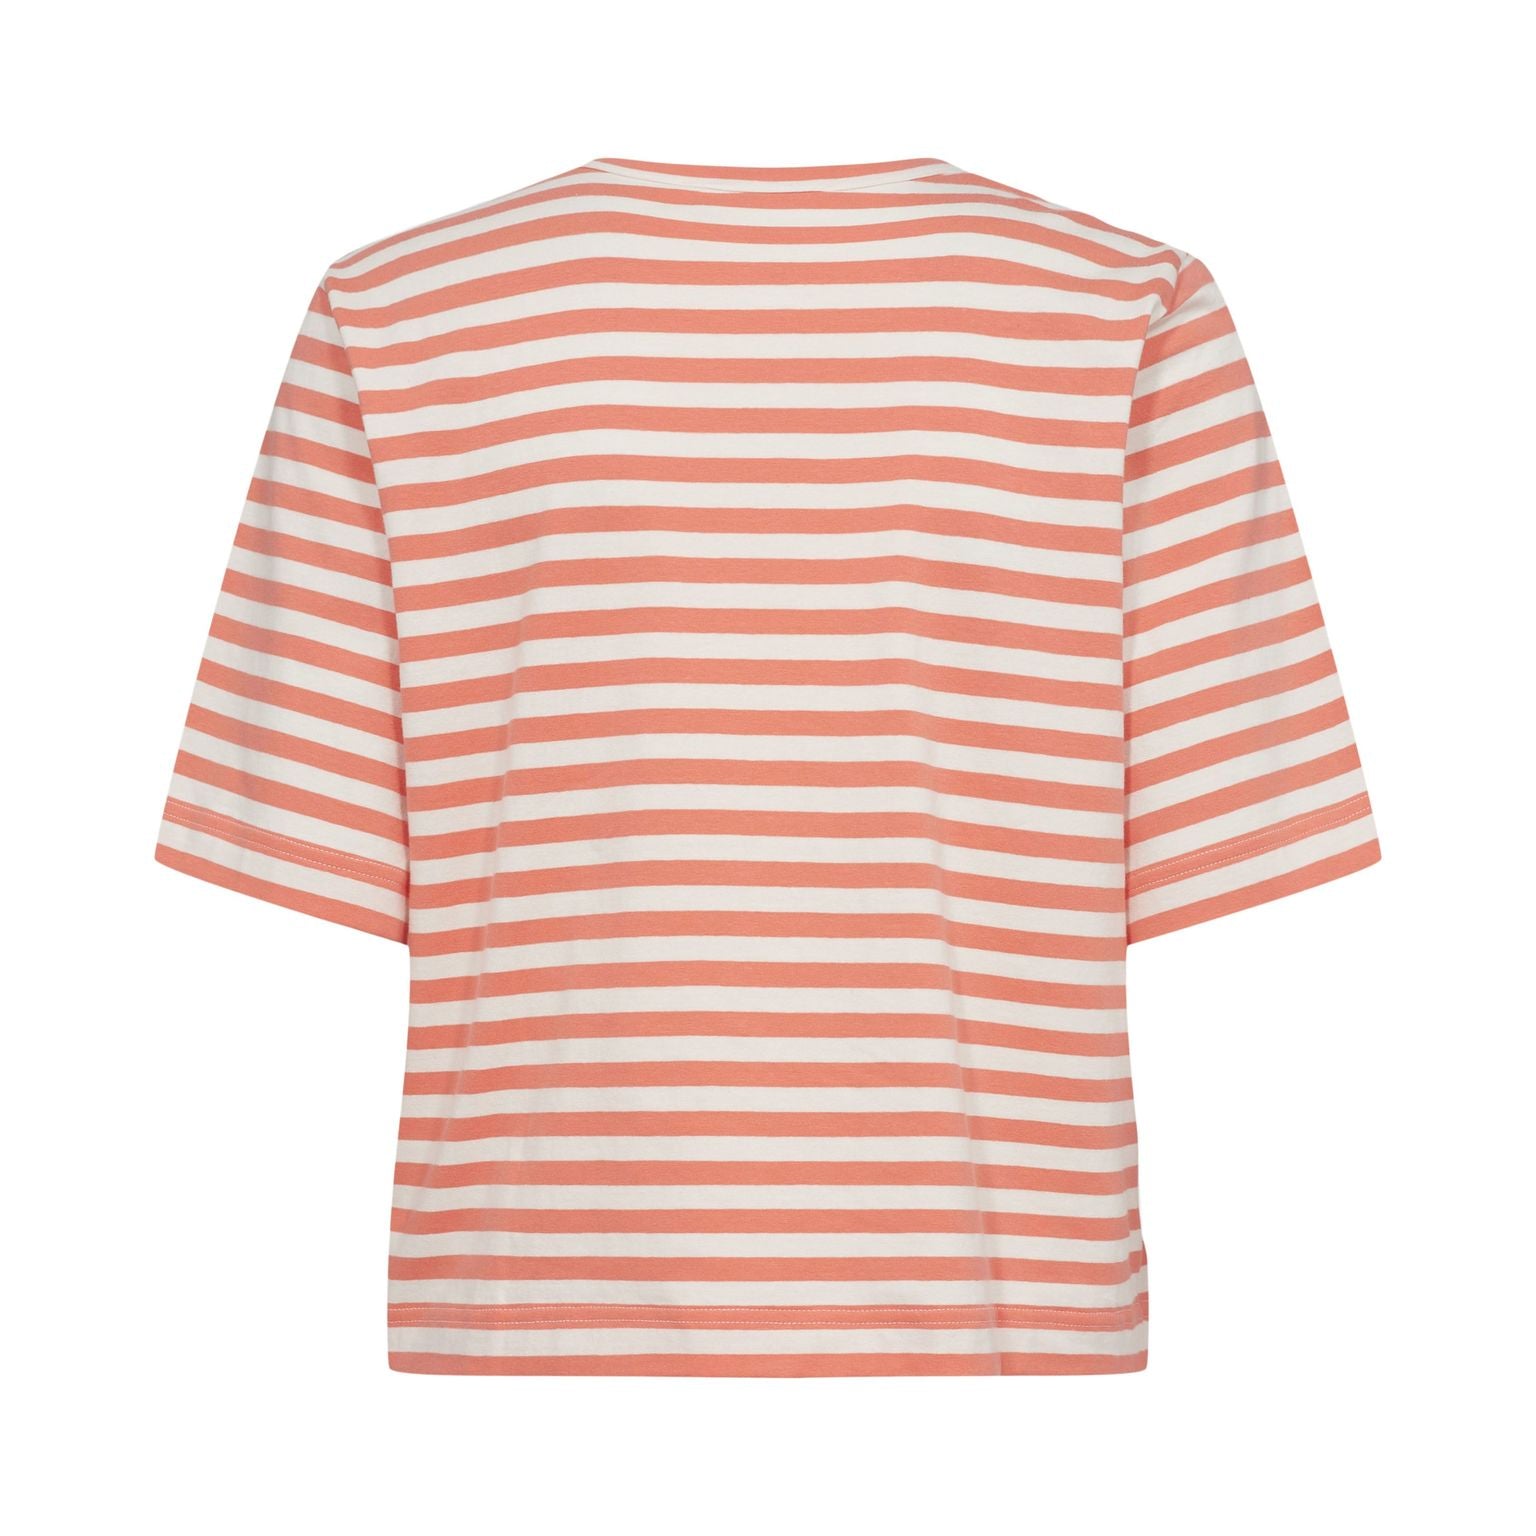 Sofie Schnoor T-Shirt Coral Striped